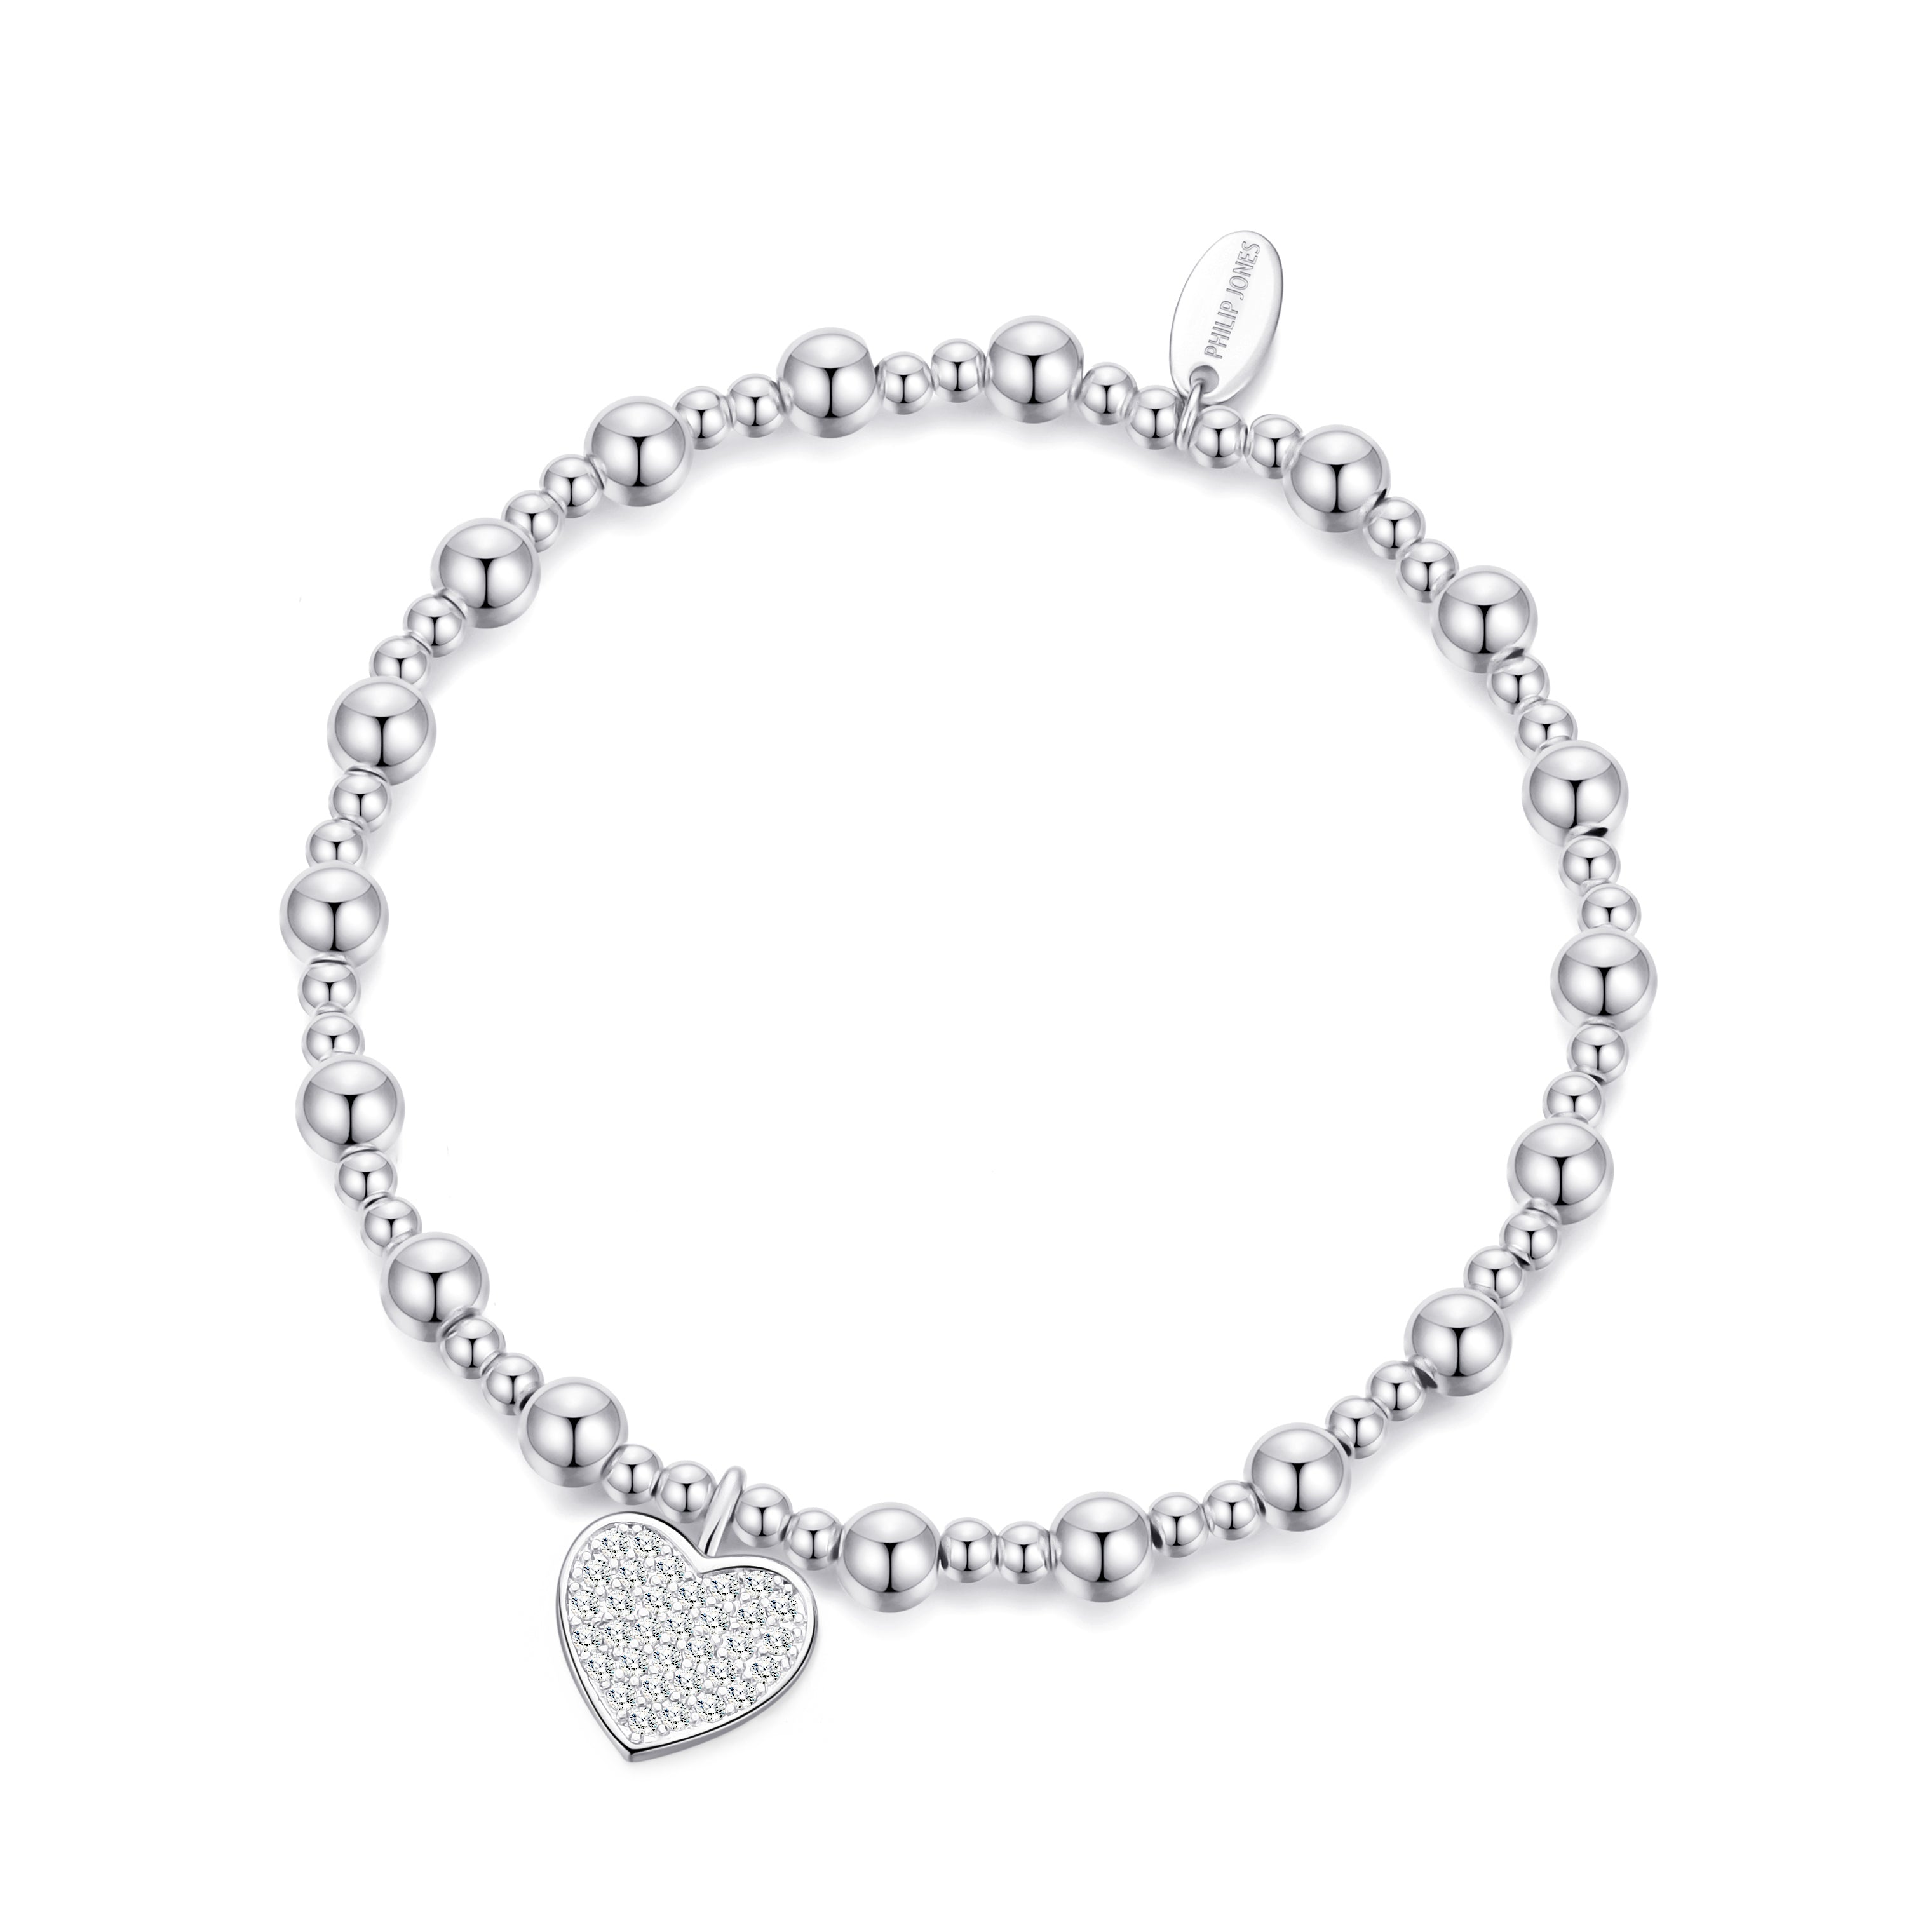 50th Birthday Heart Charm Stretch Bracelet with Quote Gift Box